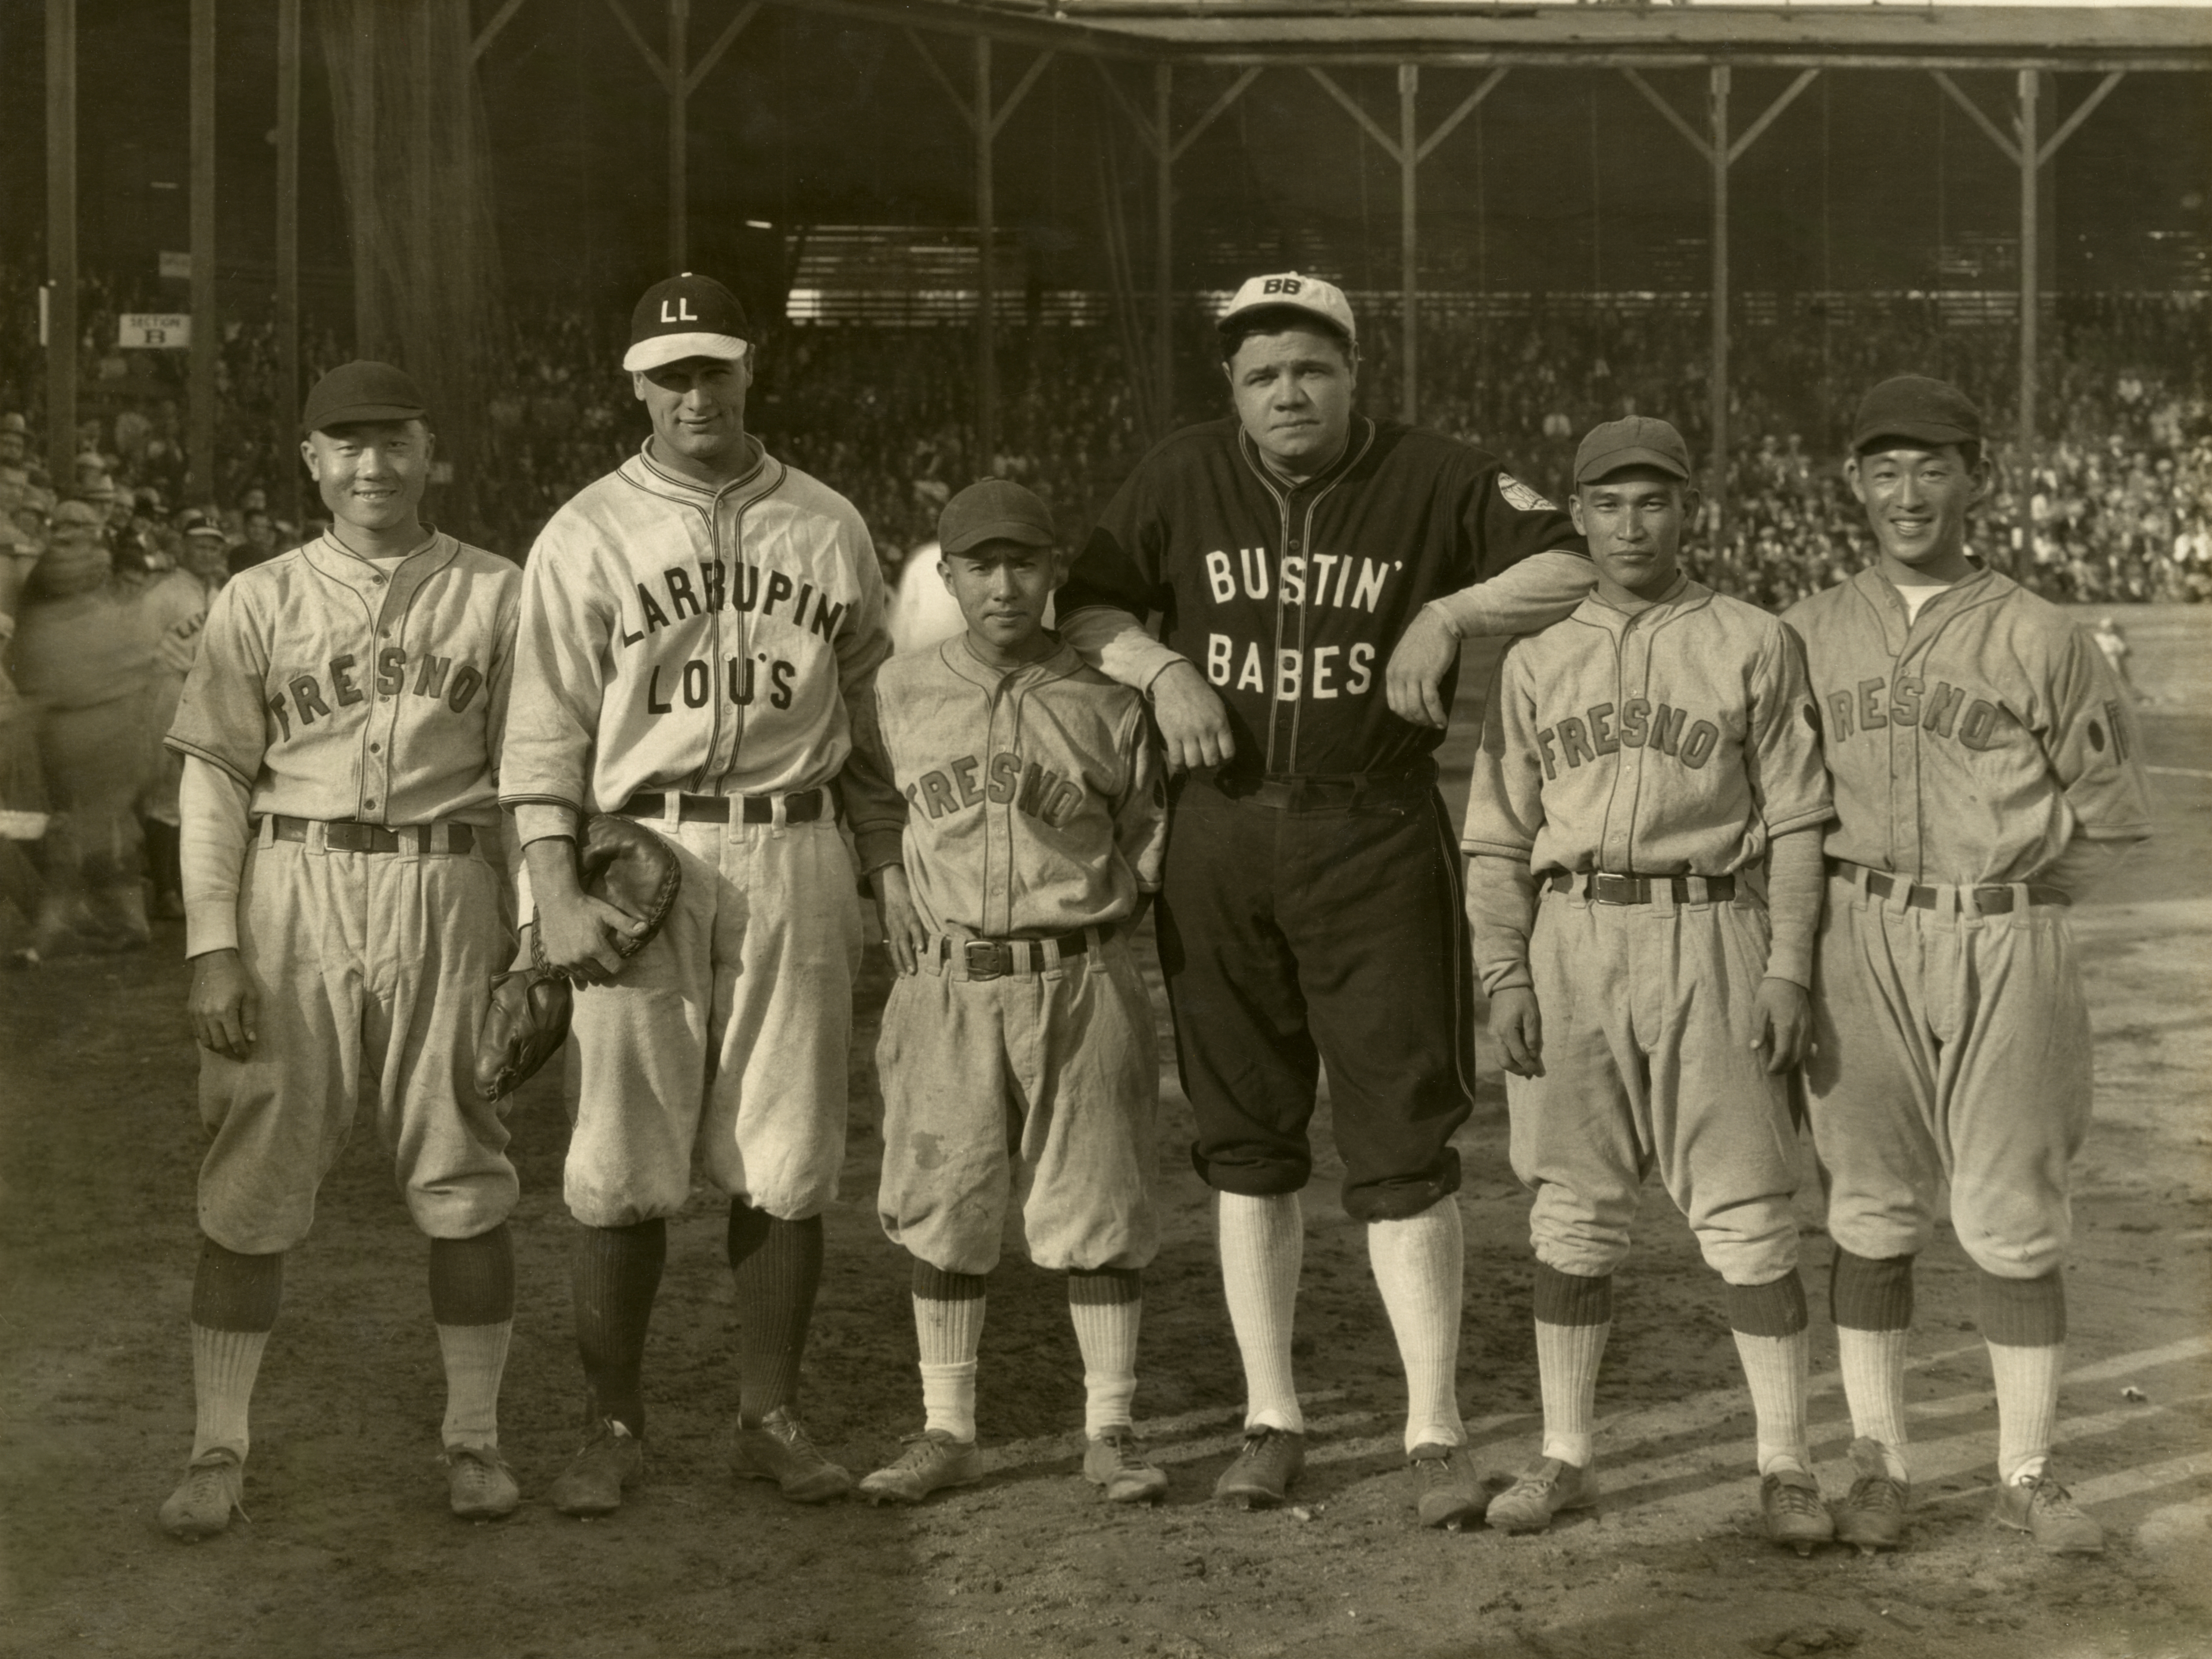 Following the 1927 World Series, Lou Gehrig and Babe Ruth barnstormed across the country, playing 21 games in just three weeks. Here the Yankees' legends loom large on either side of Kenichi Zenimura and other members of the Fresno Athletic Club at Fireman Park in Fresno, Calif., Oct. 29, 1927.